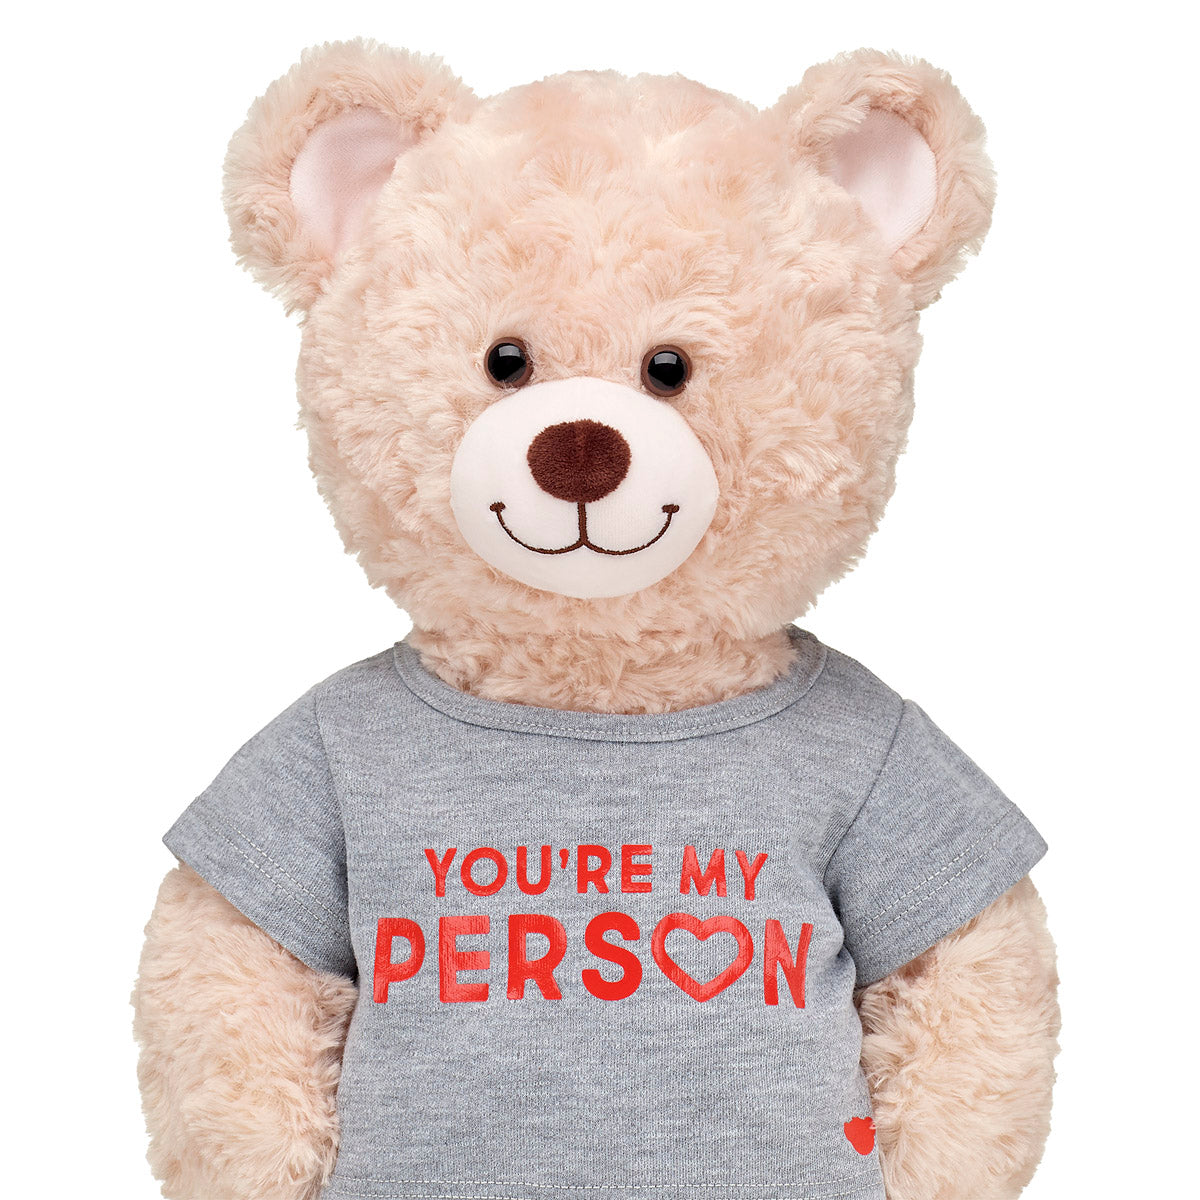 You're My Person Tee Build-A-Bear Workshop Australia